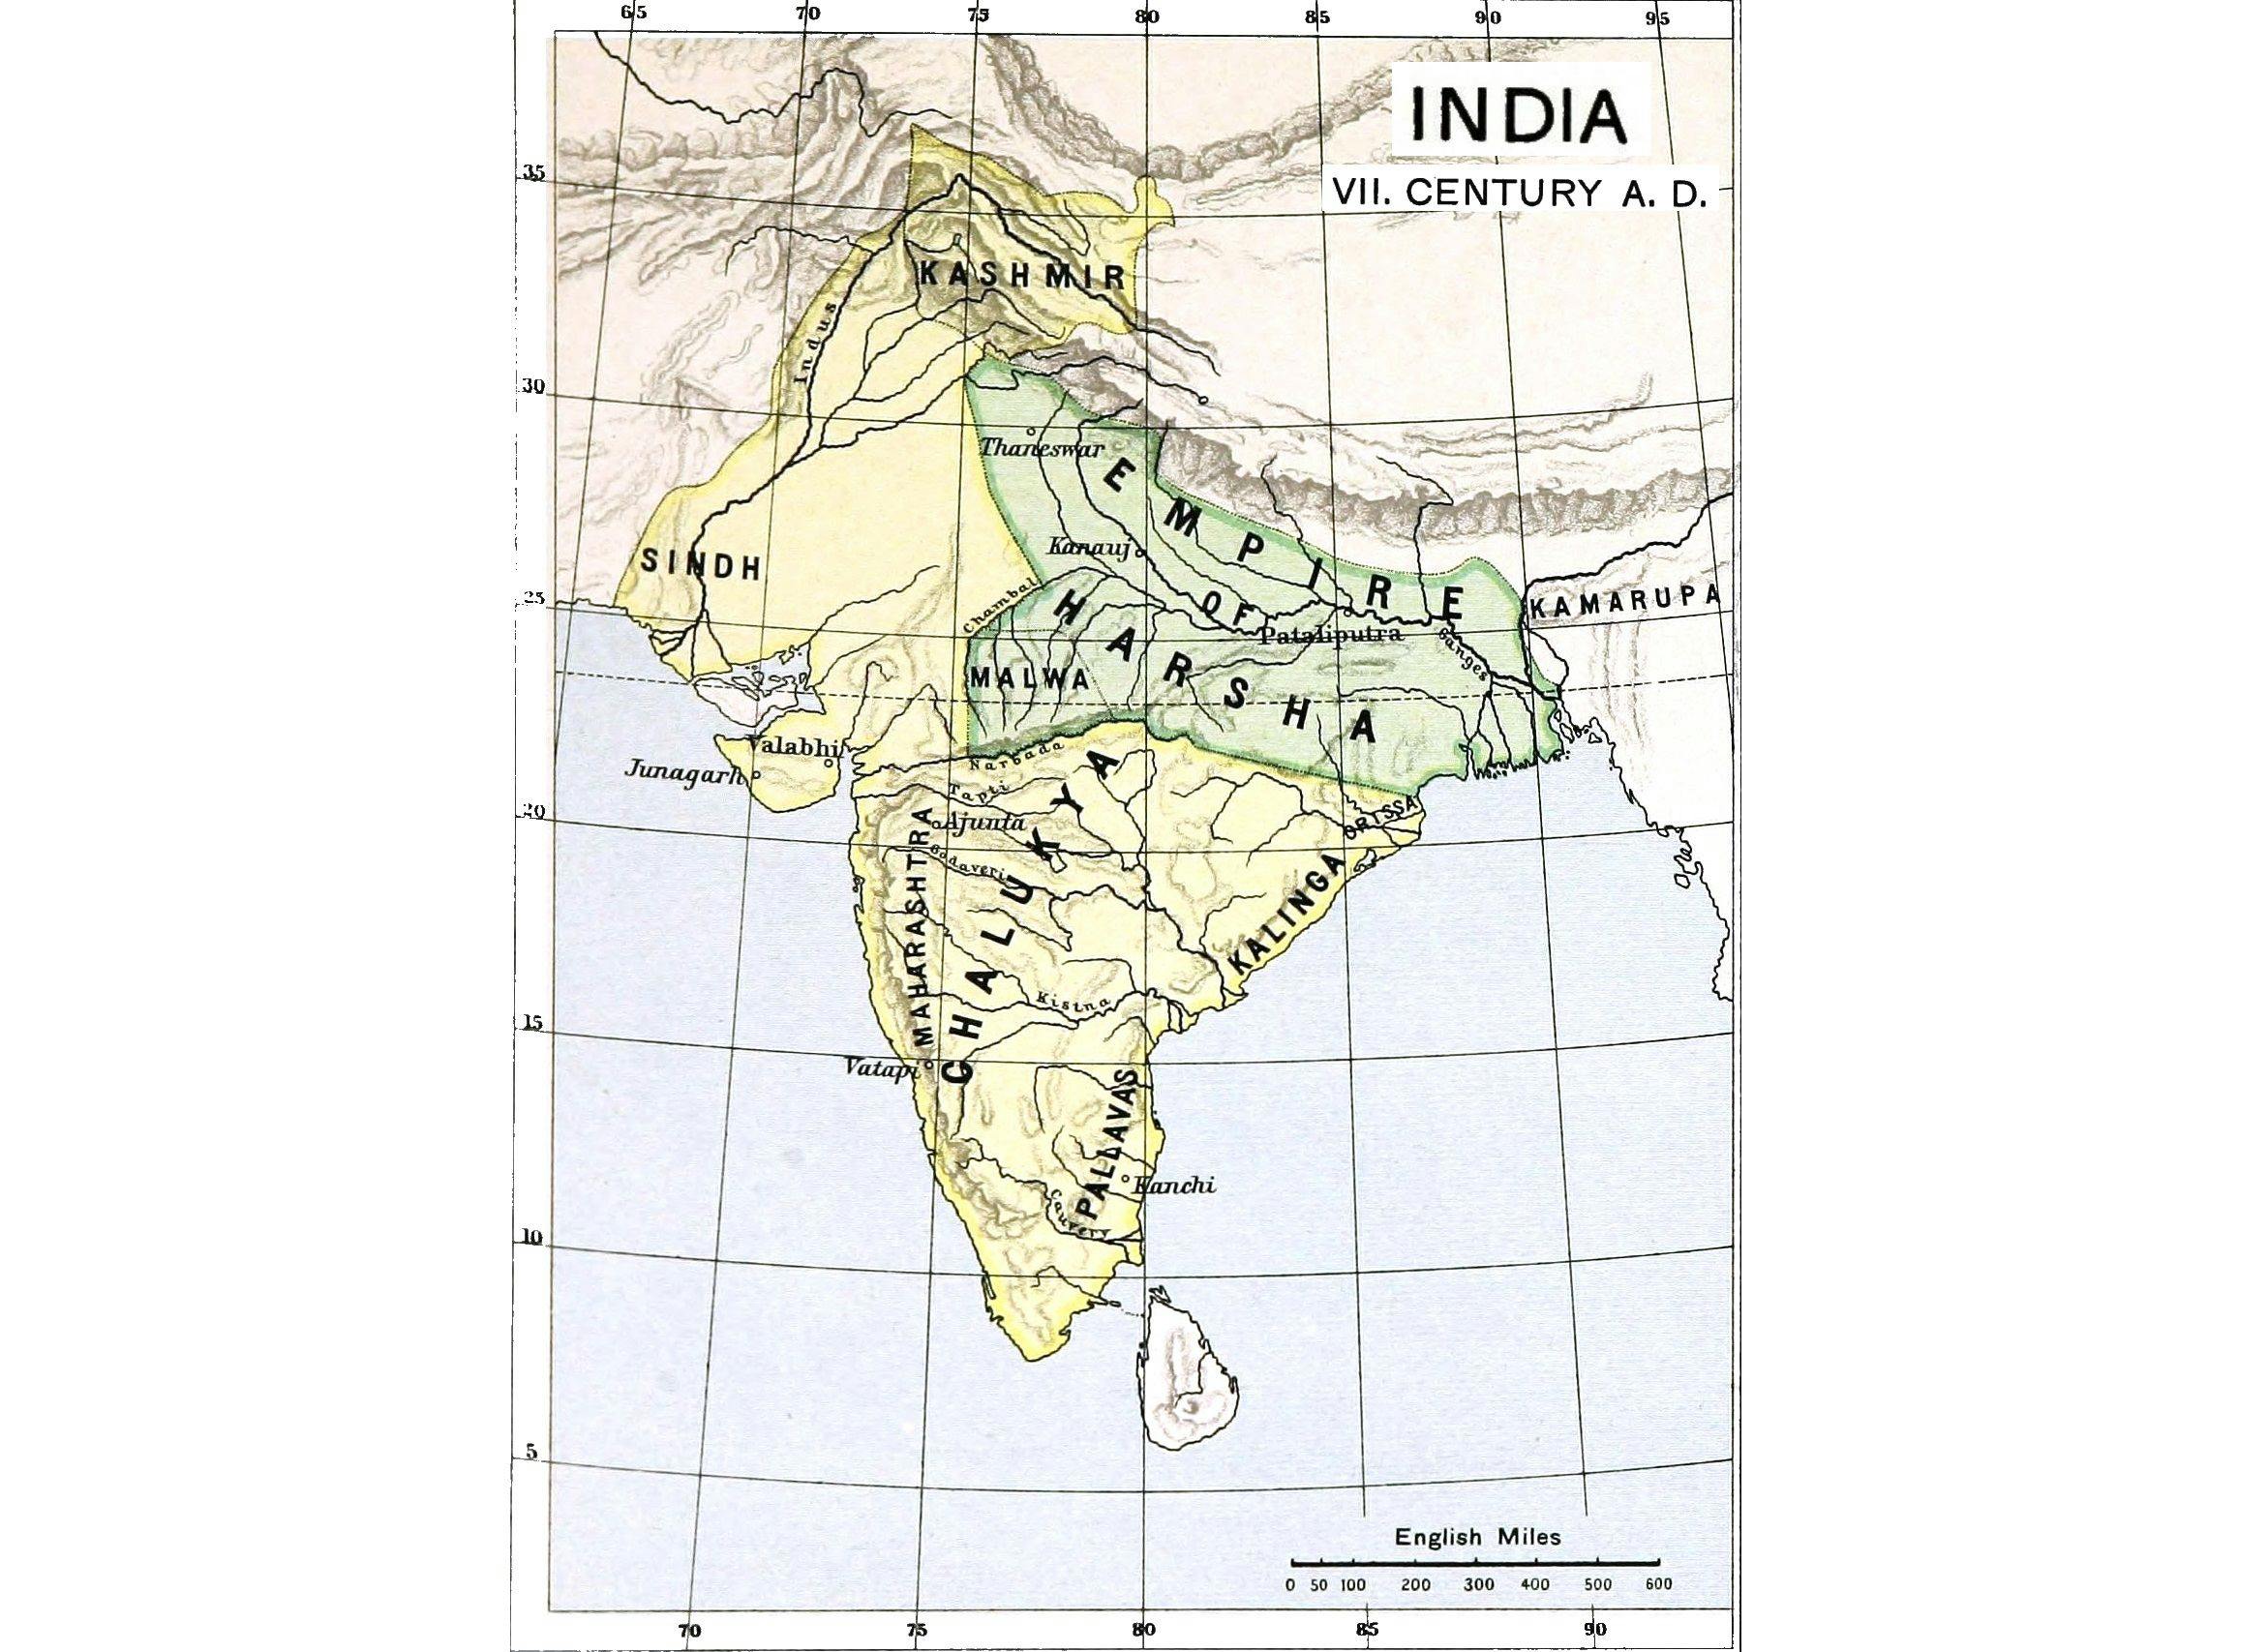 India’s map of the 7th Century showing Harsha’s empire